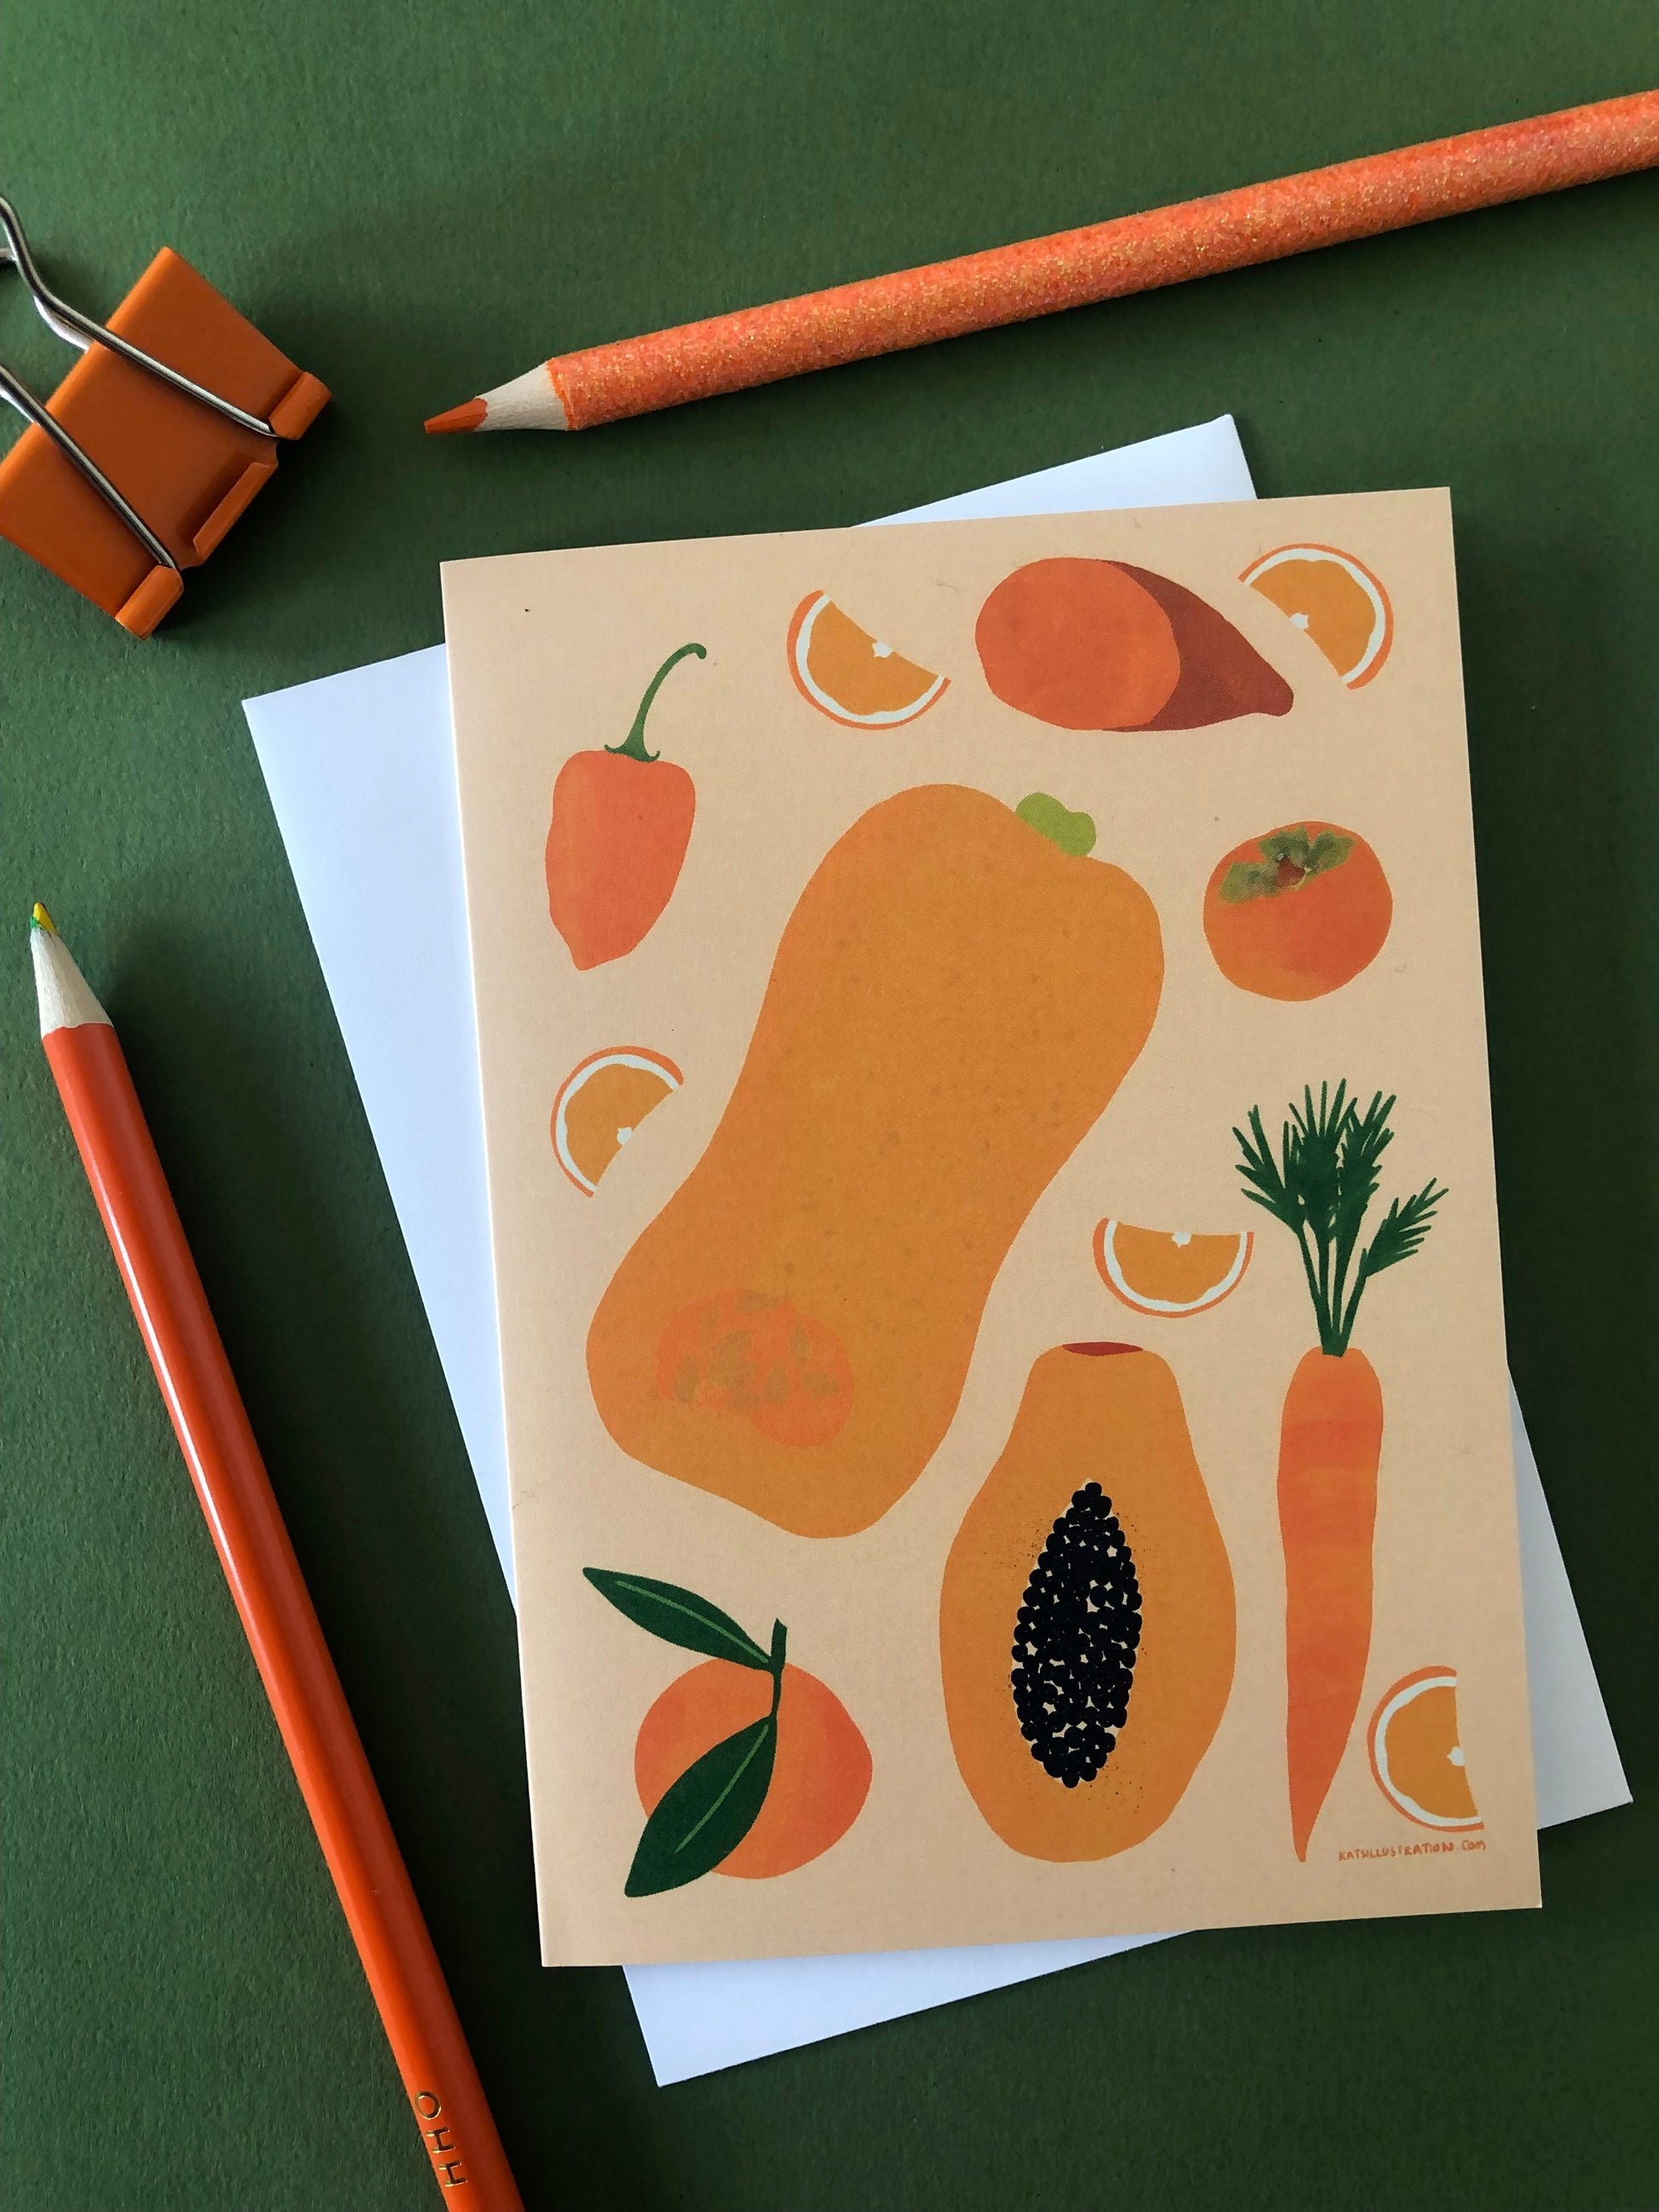 Set of 5 rainbow, illustrated notecards featuring fresh fruits and veggies..